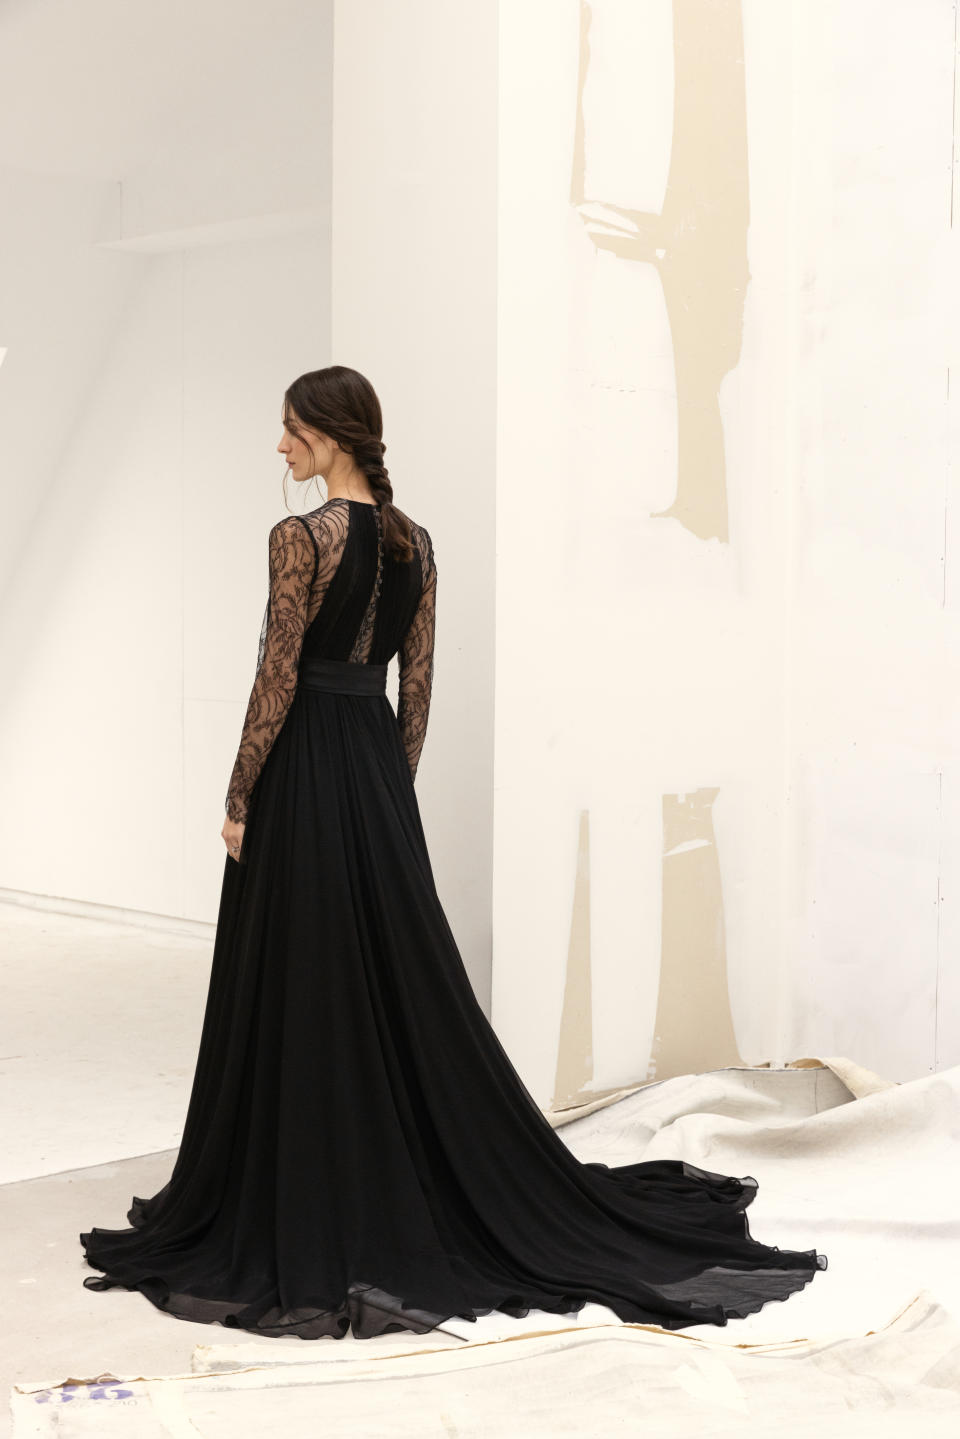 Some designers are offering more colors including black styles, black wedding dress trends